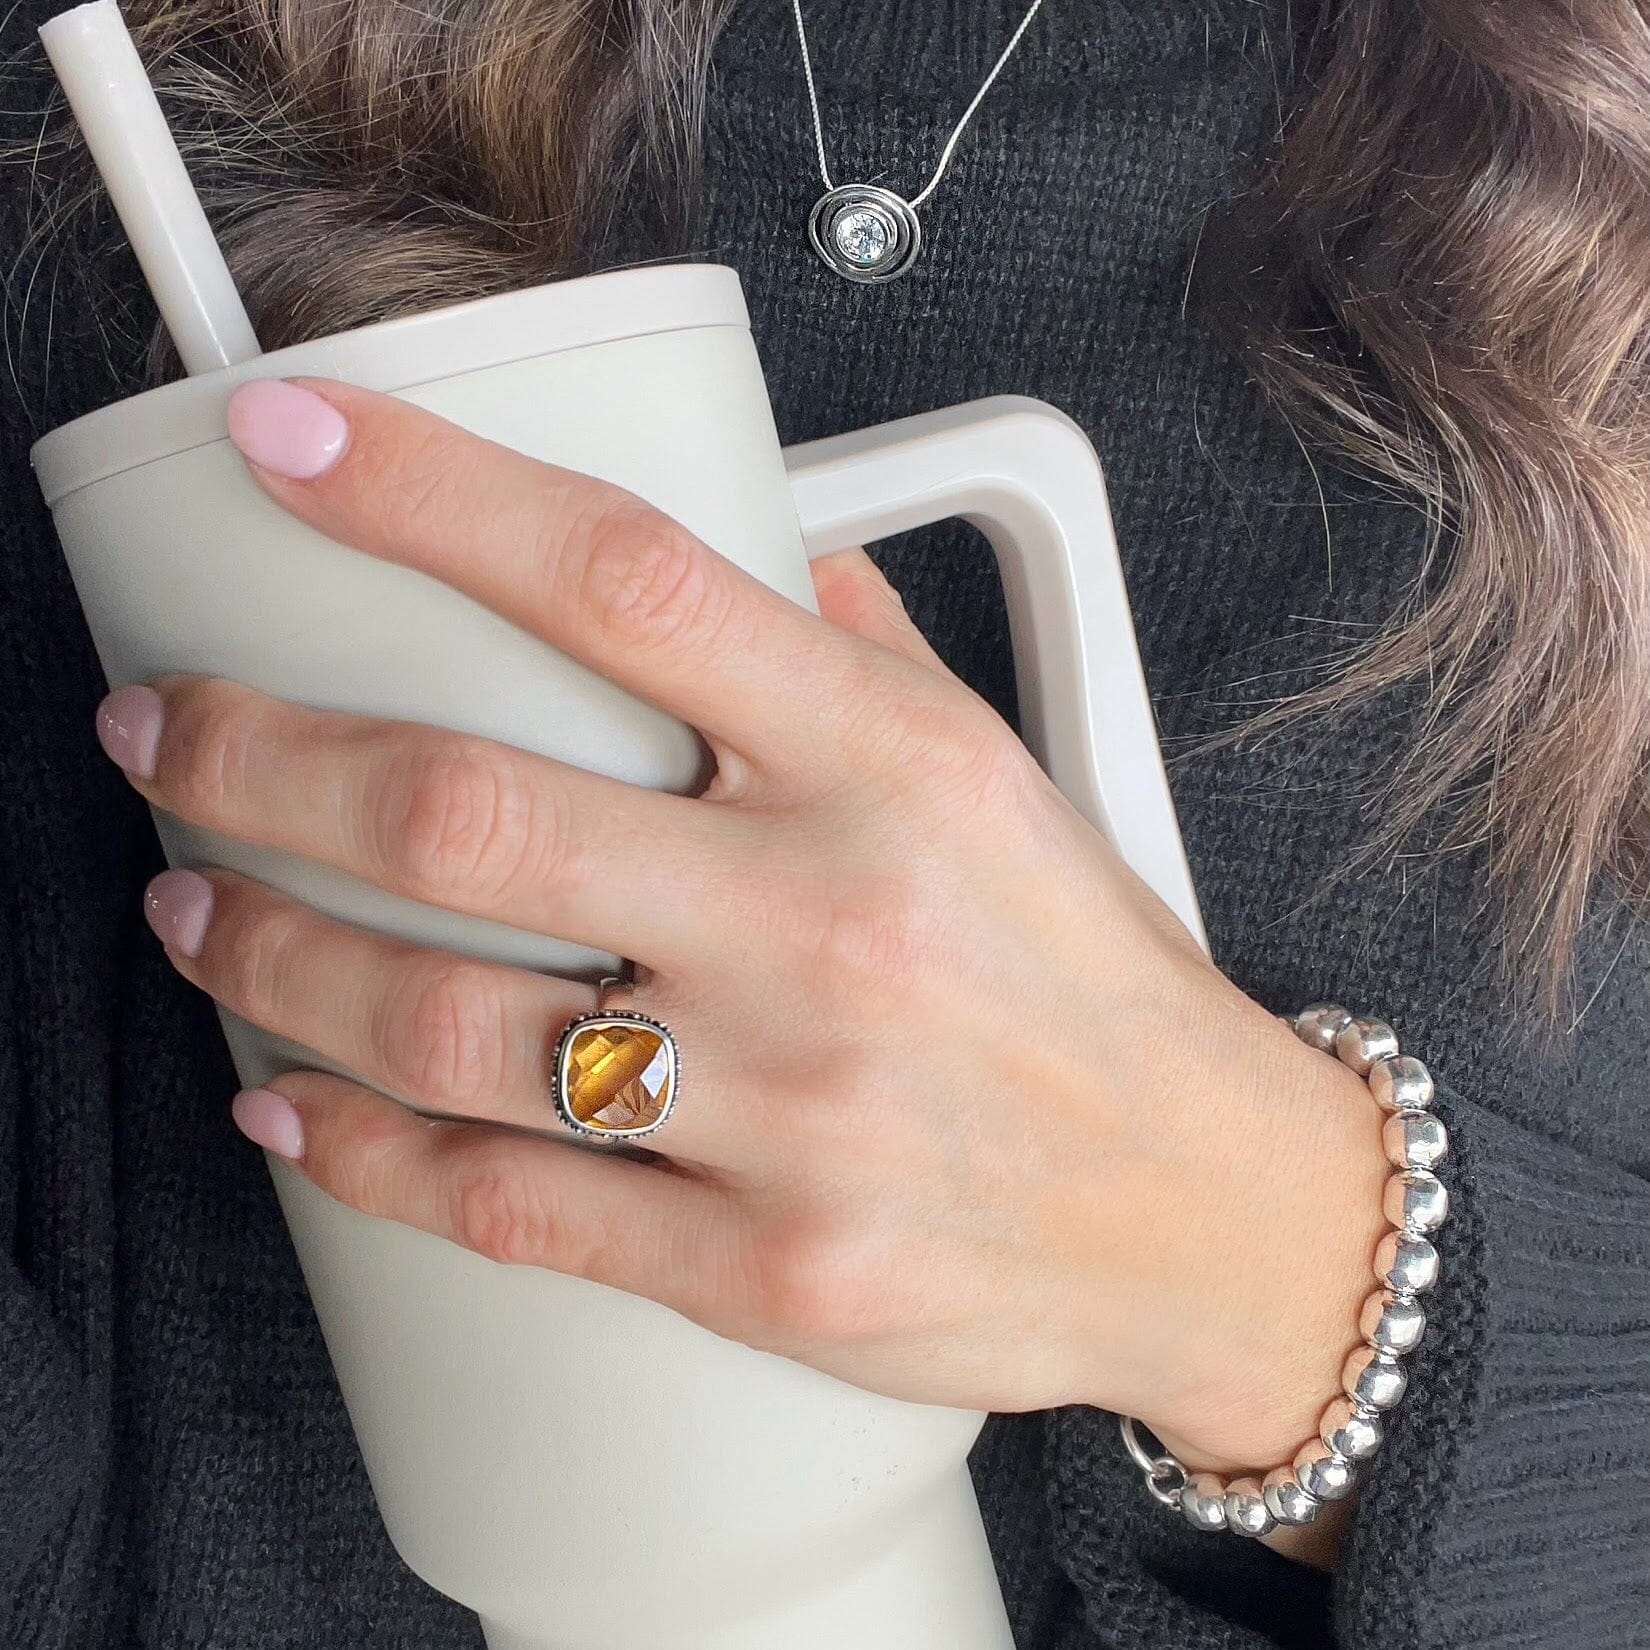 Tuscan Sun Ring paired with Influencer Bracelet and Crown Jewel Necklace